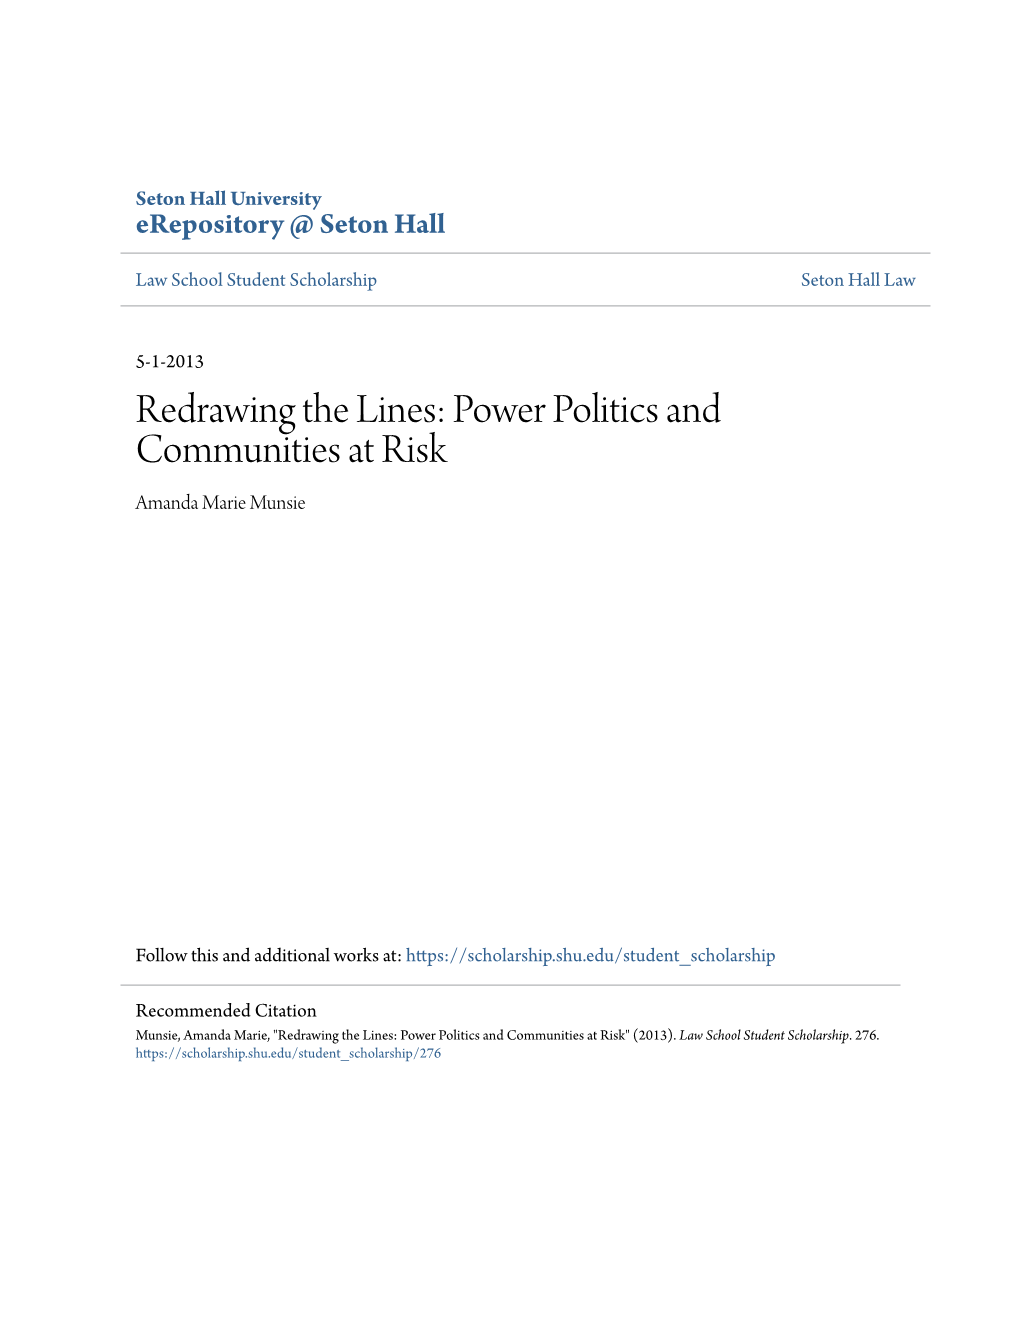 Redrawing the Lines: Power Politics and Communities at Risk Amanda Marie Munsie